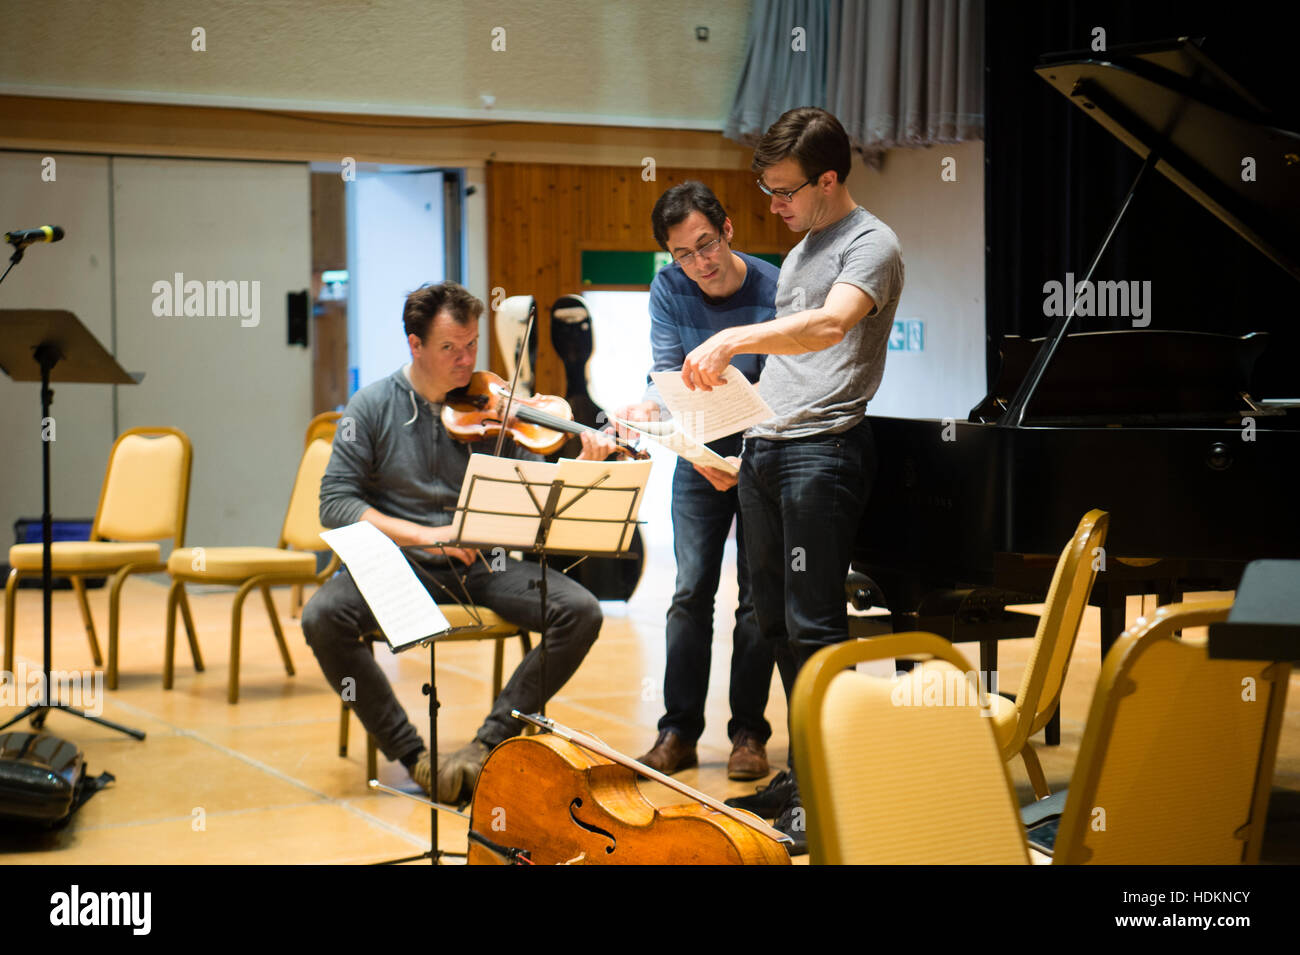 Tom Poster (piano), Guy Johnston (cello) and Magnus Johnston (violin) rehearsing for their evening concert at MusicFest Aberystwyth , Wales UKL - July 2016 Stock Photo